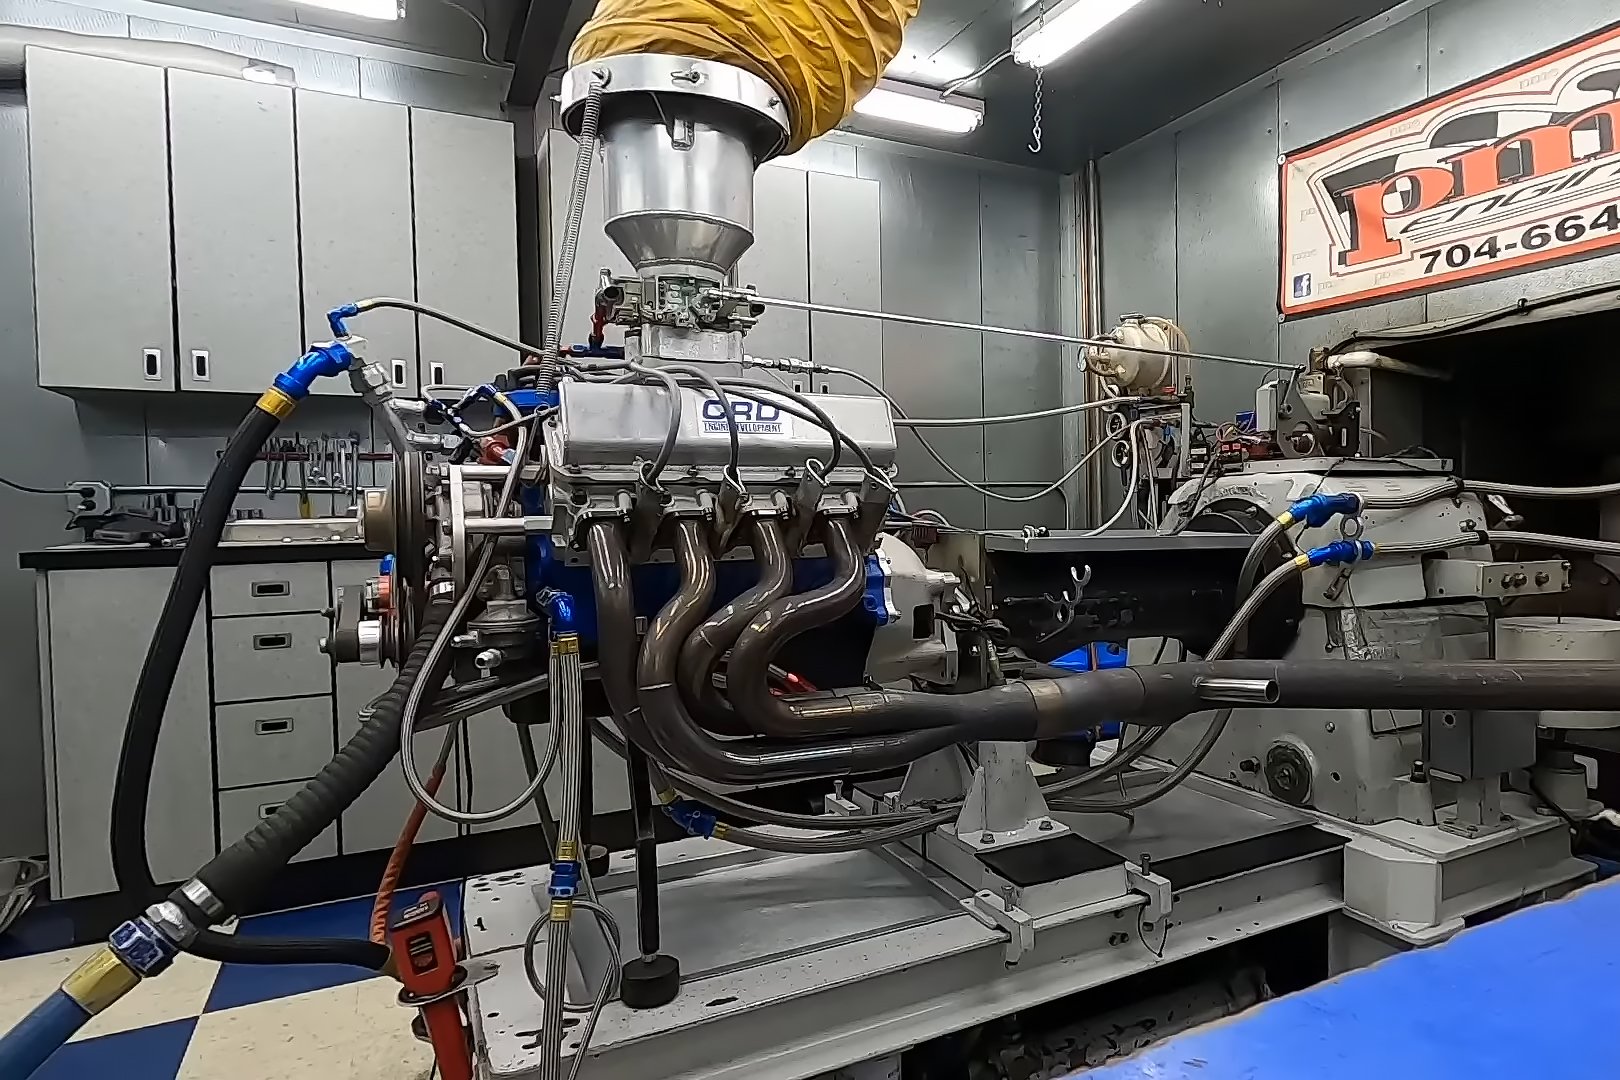 https://enginelabs.com/news/opening-a-time-capsule-dynoing-a-1990s-nascar-engine-in-2022